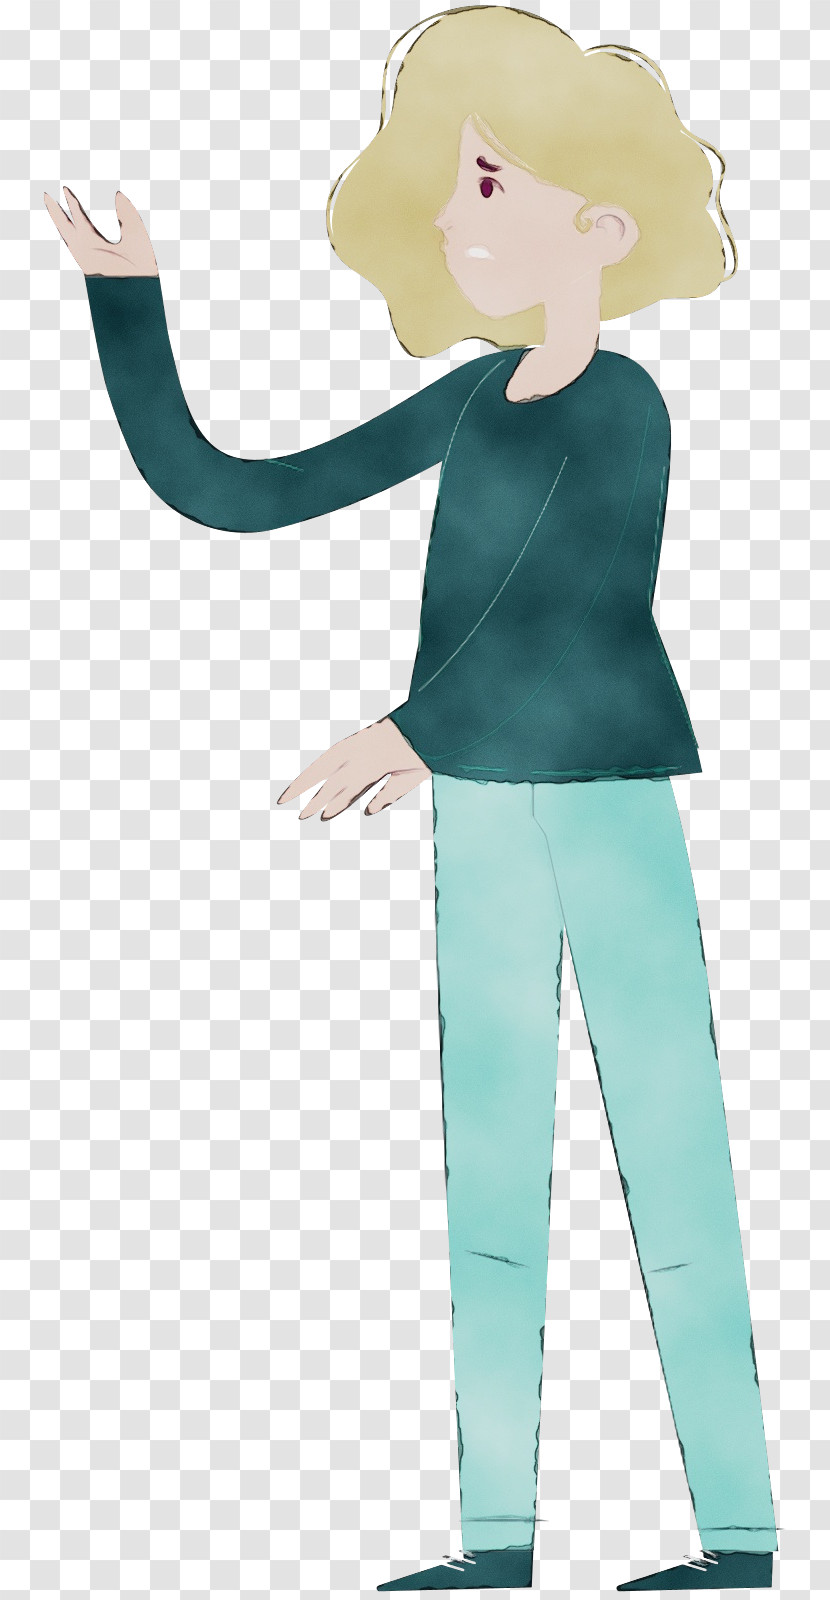 Character Clothing Cartoon Teal Figurine Transparent PNG